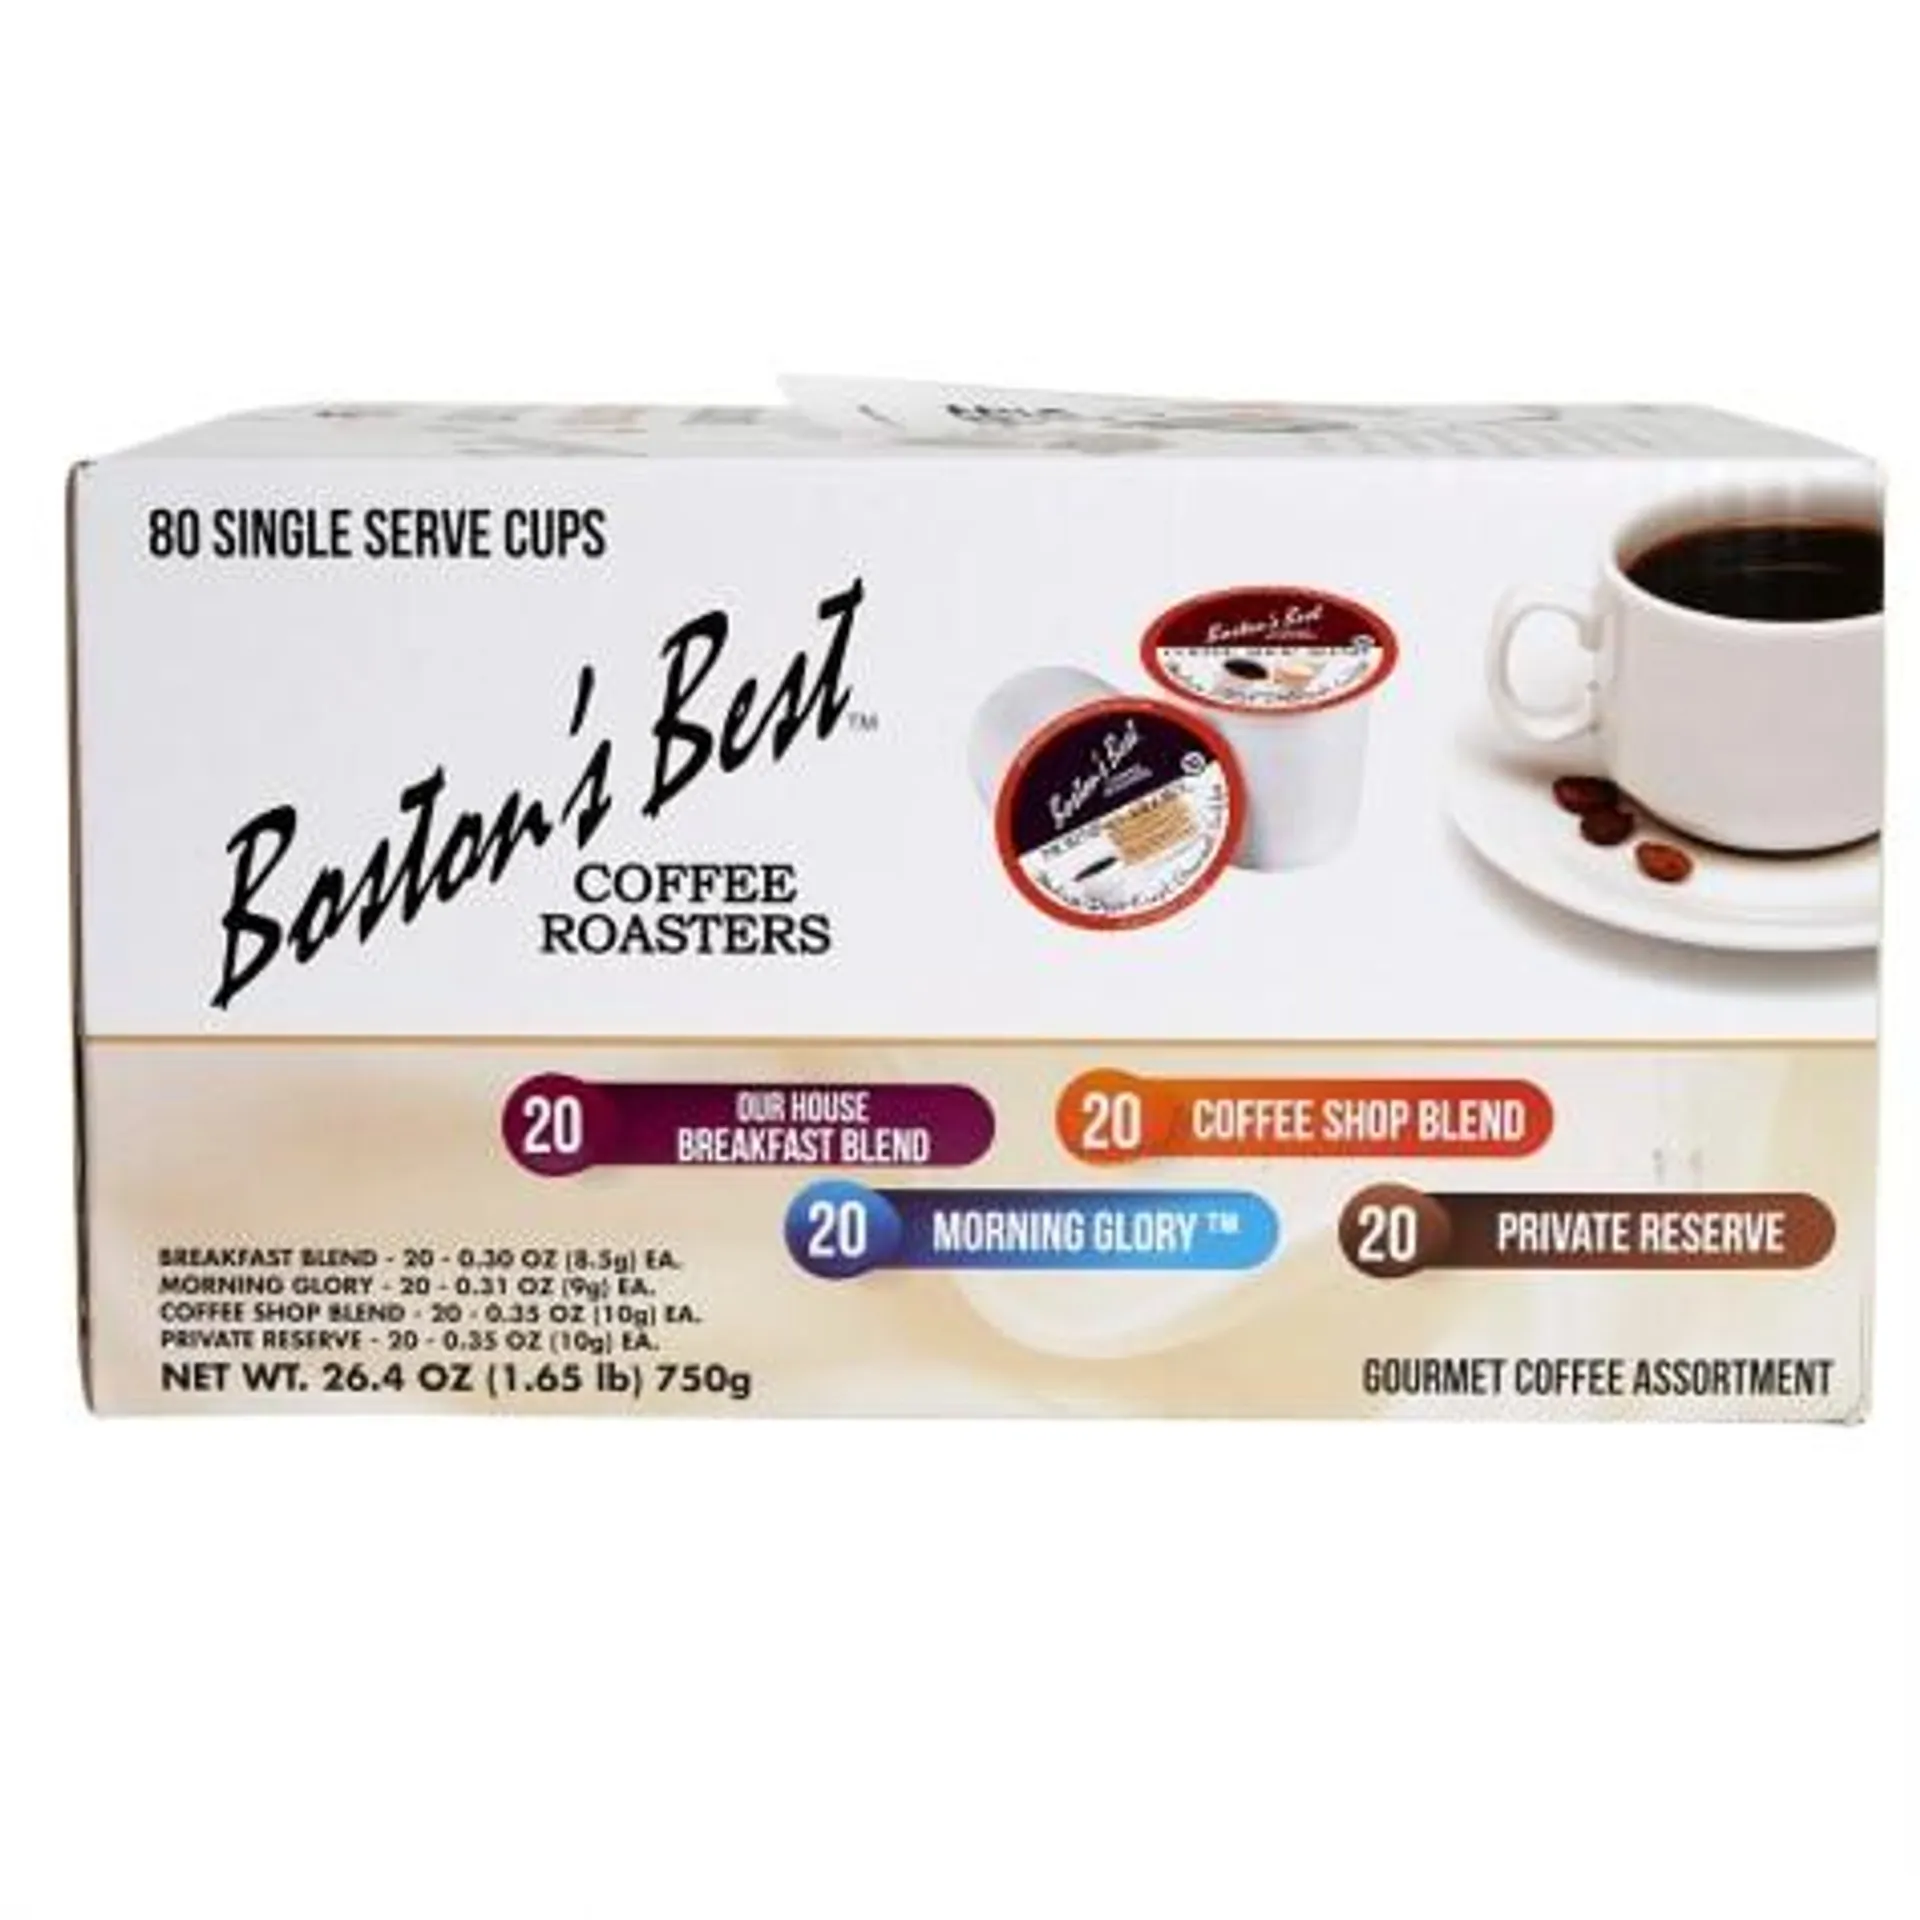 Boston's Best Variety Pack Gourmet Assortment Coffee Cups, 80 Count